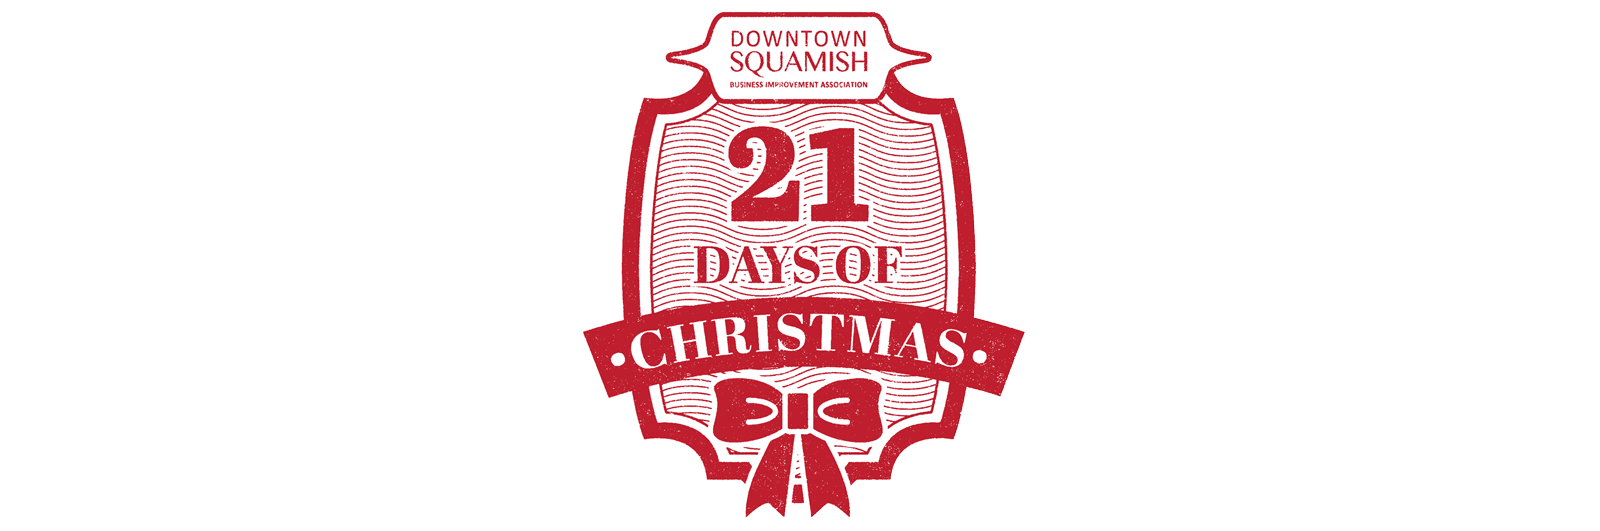 https://www.downtownsquamish.com/wp-content/uploads/2020/11/21_DAYS_logo_Banner.png